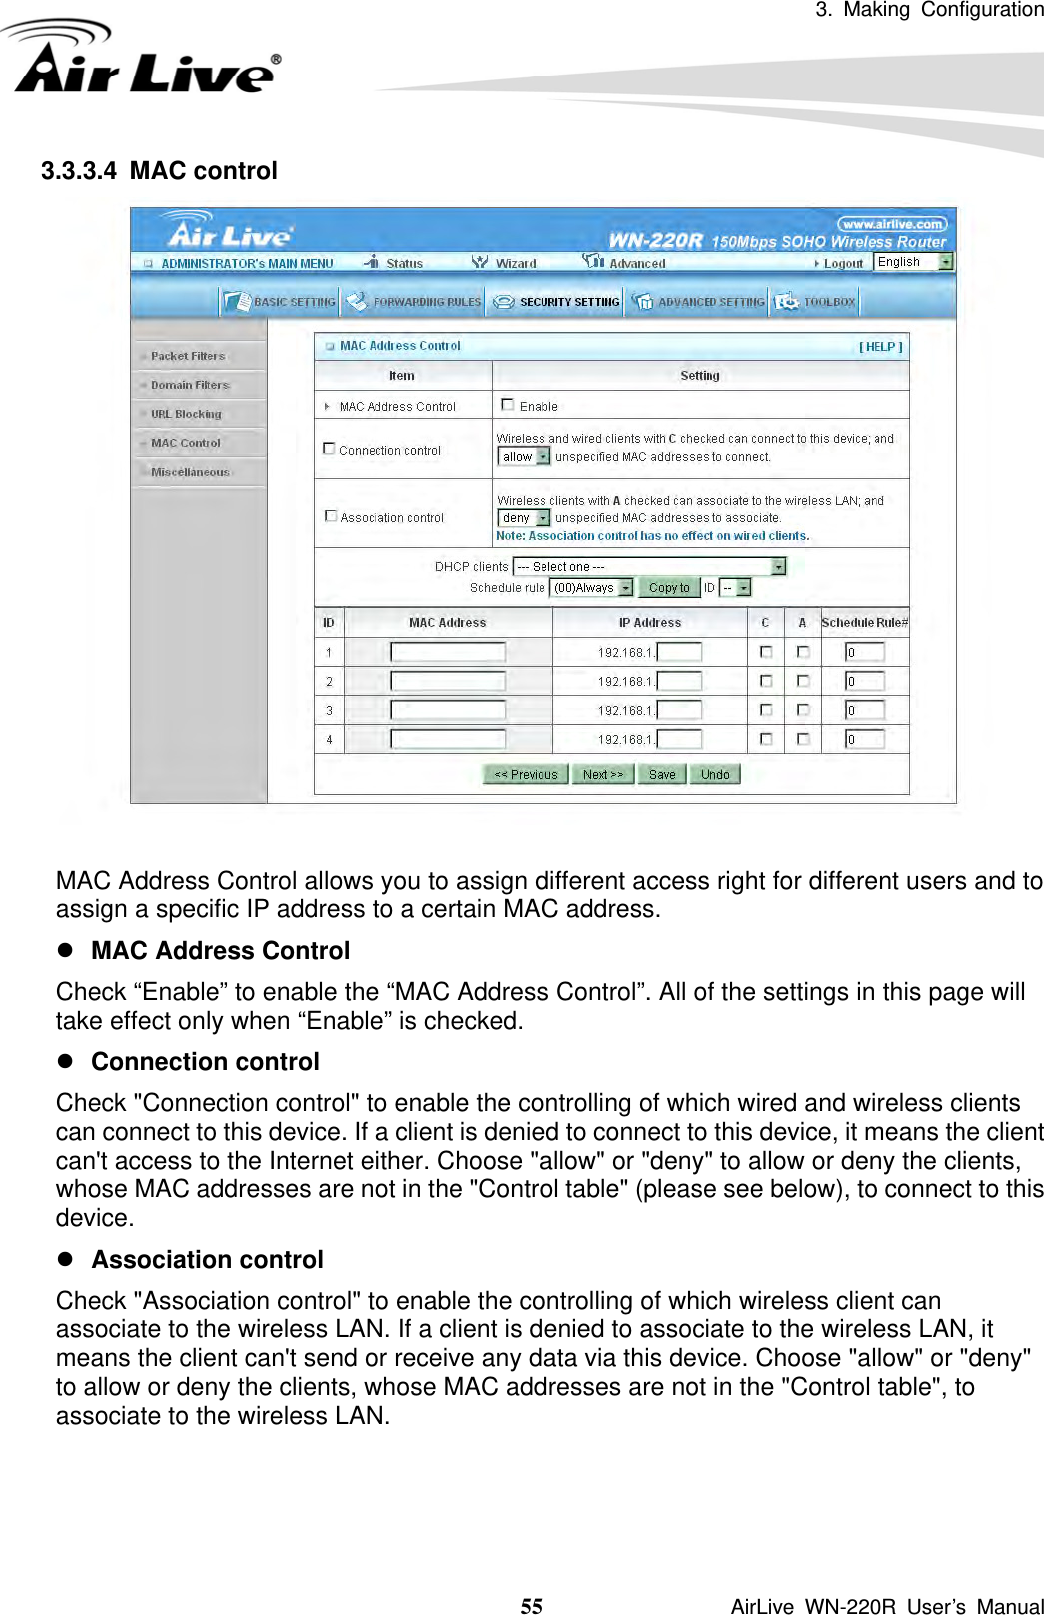 3. Making Configuration  55               AirLive WN-220R User’s Manual 3.3.3.4 MAC control   MAC Address Control allows you to assign different access right for different users and to assign a specific IP address to a certain MAC address. z MAC Address Control   Check “Enable” to enable the “MAC Address Control”. All of the settings in this page will take effect only when “Enable” is checked. z Connection control   Check &quot;Connection control&quot; to enable the controlling of which wired and wireless clients can connect to this device. If a client is denied to connect to this device, it means the client can&apos;t access to the Internet either. Choose &quot;allow&quot; or &quot;deny&quot; to allow or deny the clients, whose MAC addresses are not in the &quot;Control table&quot; (please see below), to connect to this device. z Association control   Check &quot;Association control&quot; to enable the controlling of which wireless client can associate to the wireless LAN. If a client is denied to associate to the wireless LAN, it means the client can&apos;t send or receive any data via this device. Choose &quot;allow&quot; or &quot;deny&quot; to allow or deny the clients, whose MAC addresses are not in the &quot;Control table&quot;, to associate to the wireless LAN.    